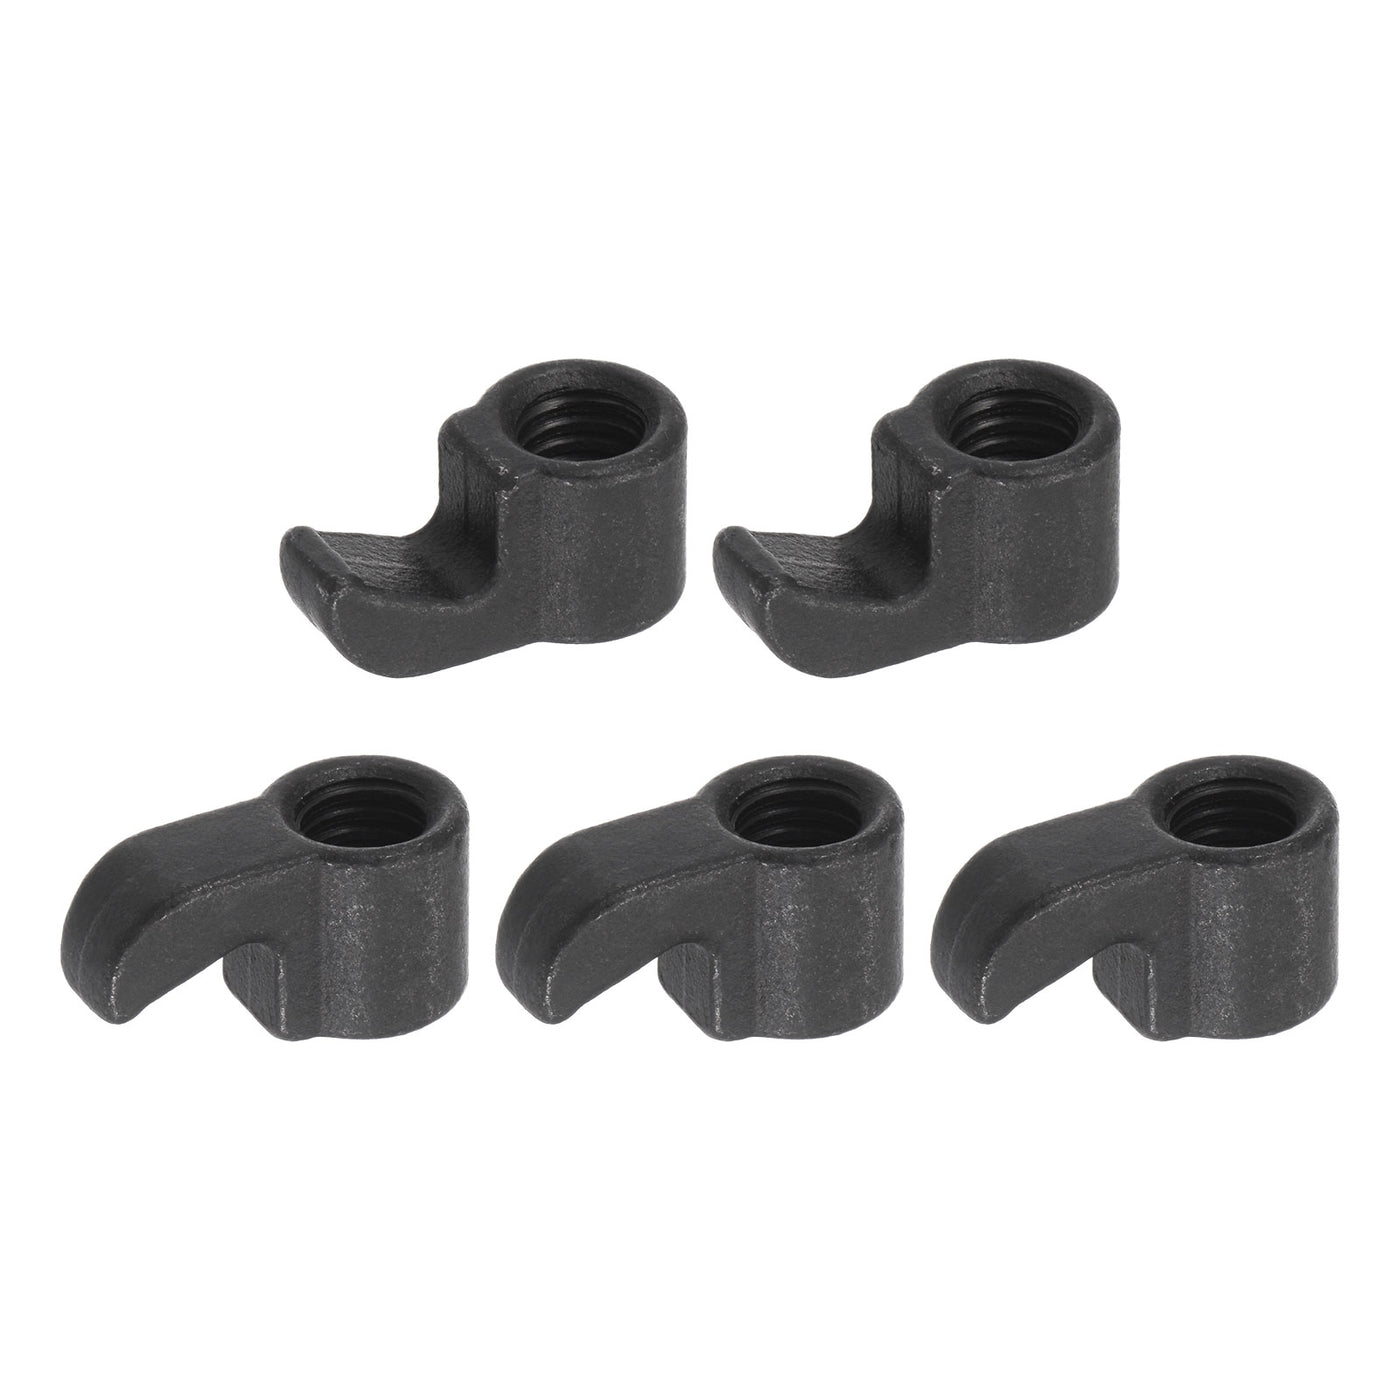 uxcell Uxcell M6-1.0 Inserts Plate Finger Clamp Fit for CNC Lathe Turning Tool, 5Pcs